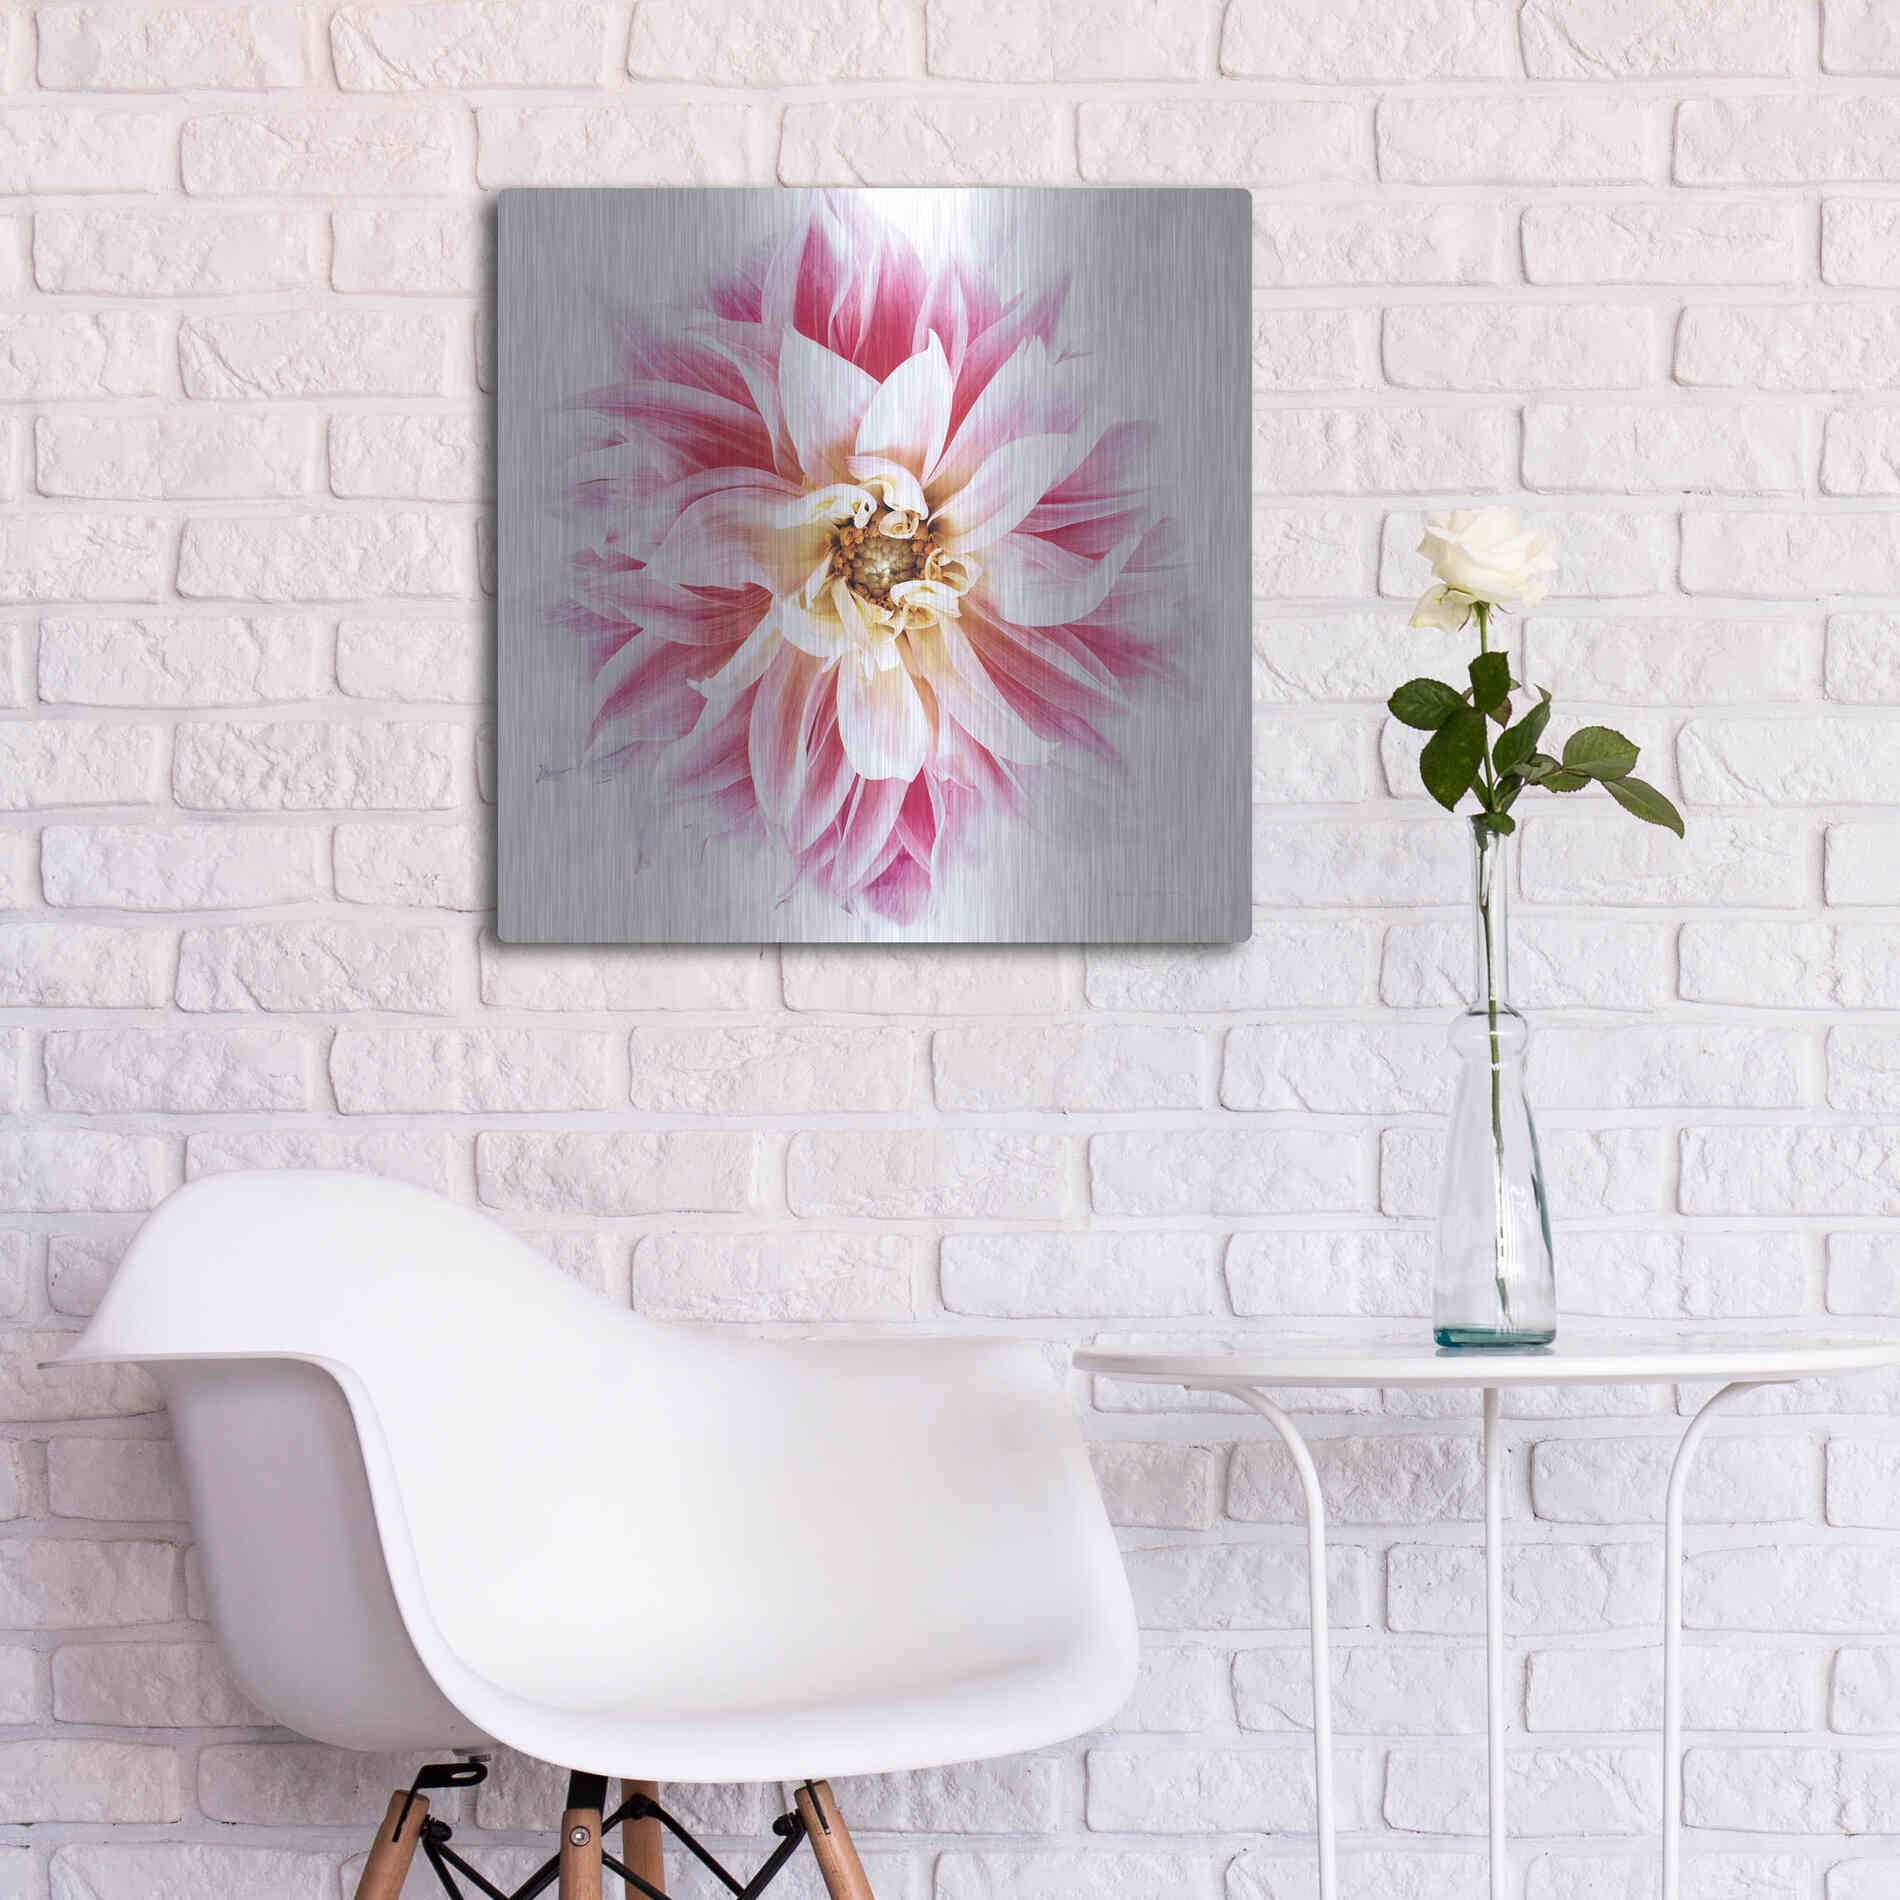 Luxe Metal Art 'Pink Dahlia' by Elise Catterall, Metal Wall Art,24x24